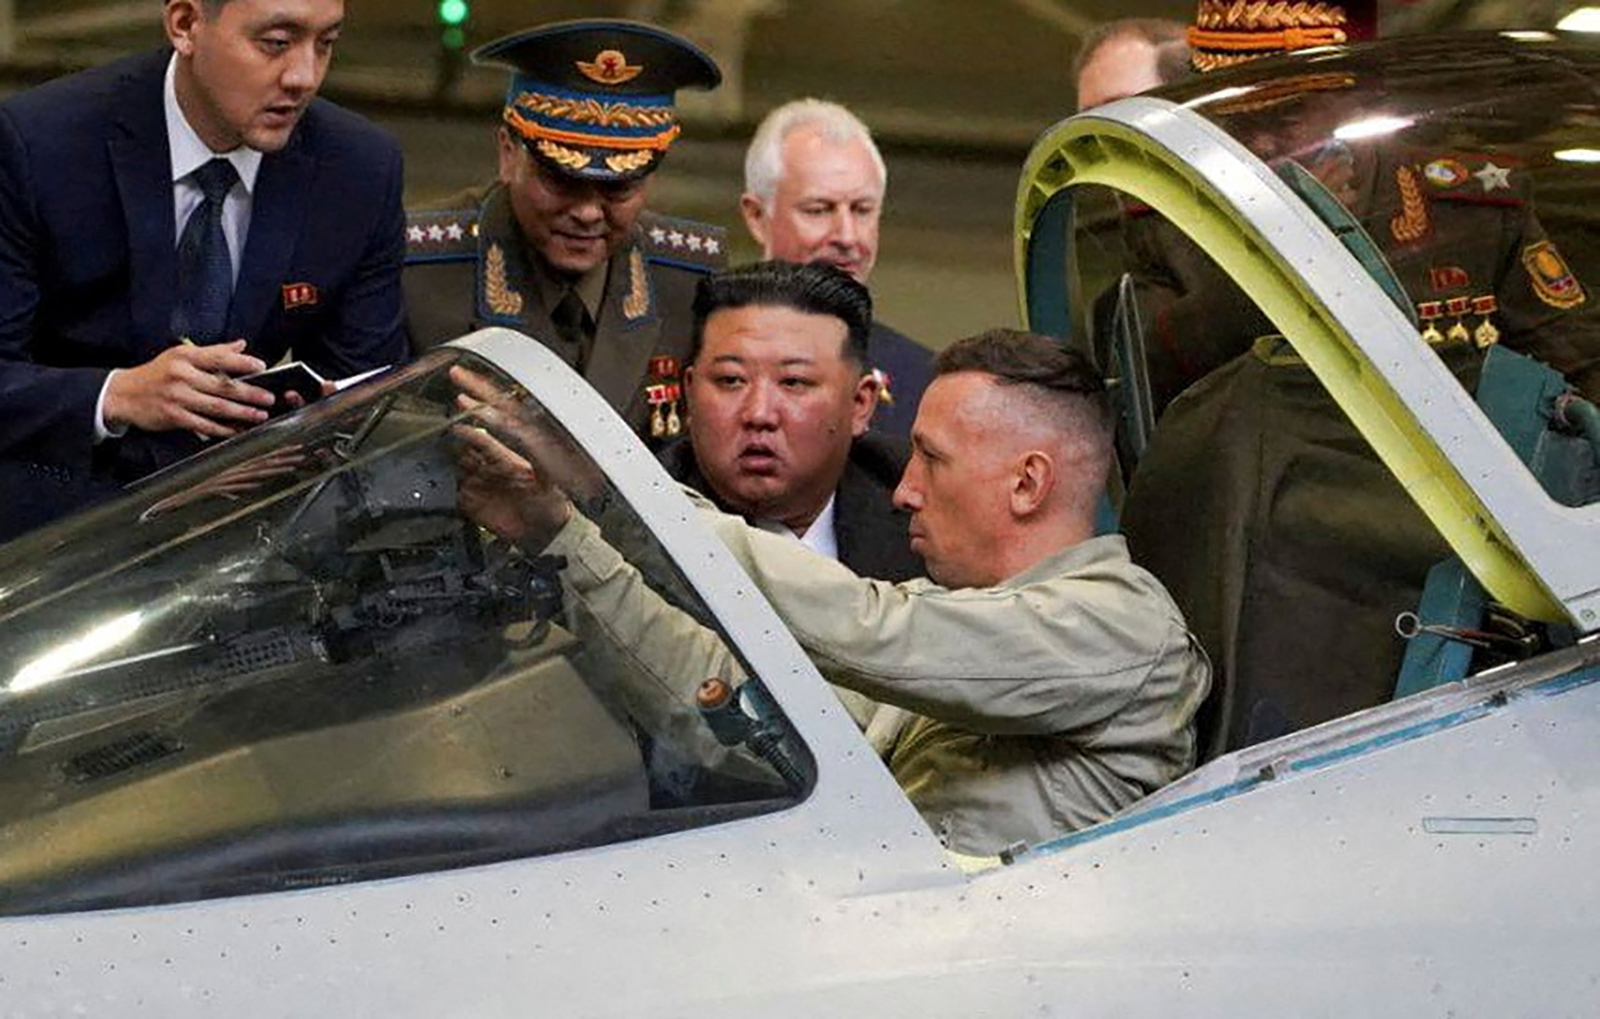 Kim Jong Un visits an aircraft manufacturing plant in the city of Komsomolsk-on-Amur in the Khabarovsk region, Russia, on September 15.